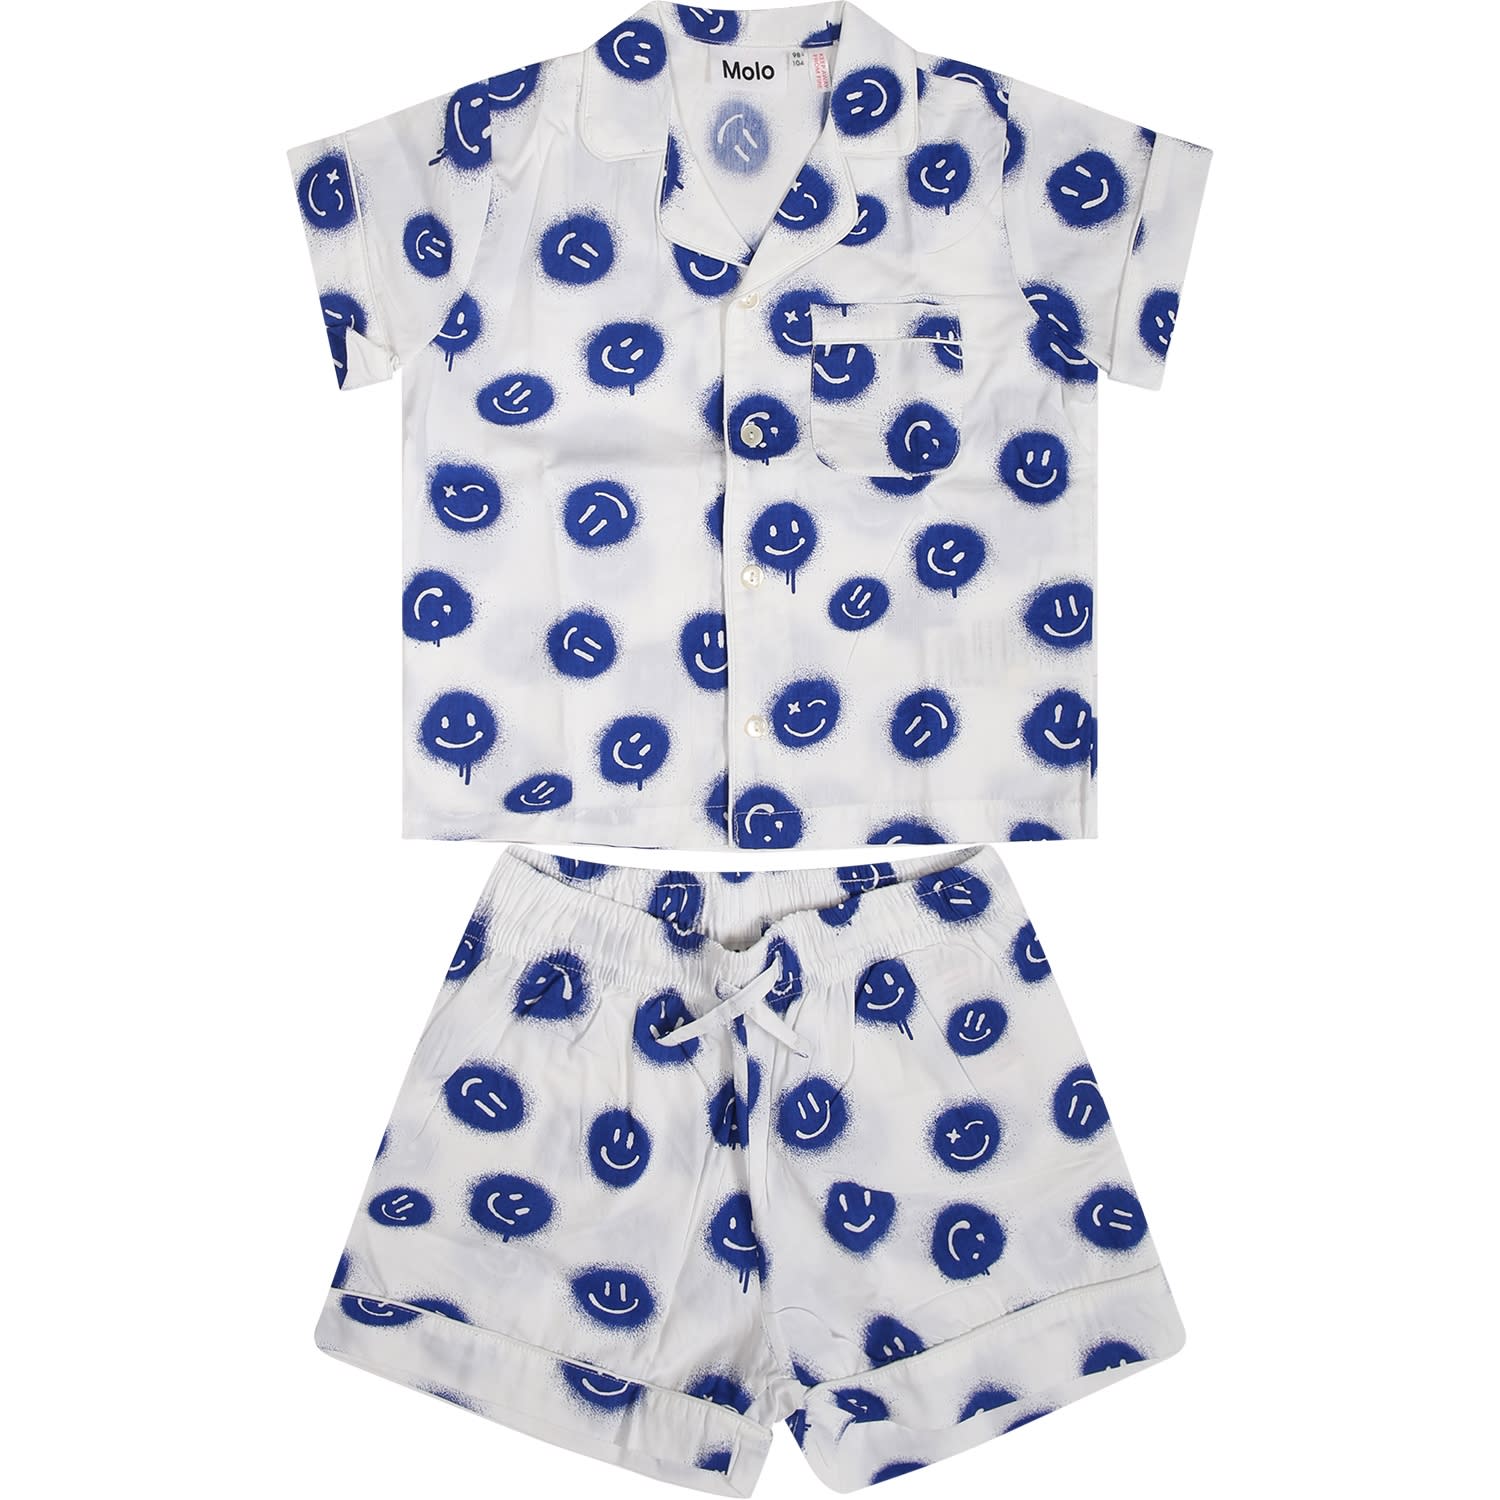 Molo White Pajamas For Kids With Smiley In Blue